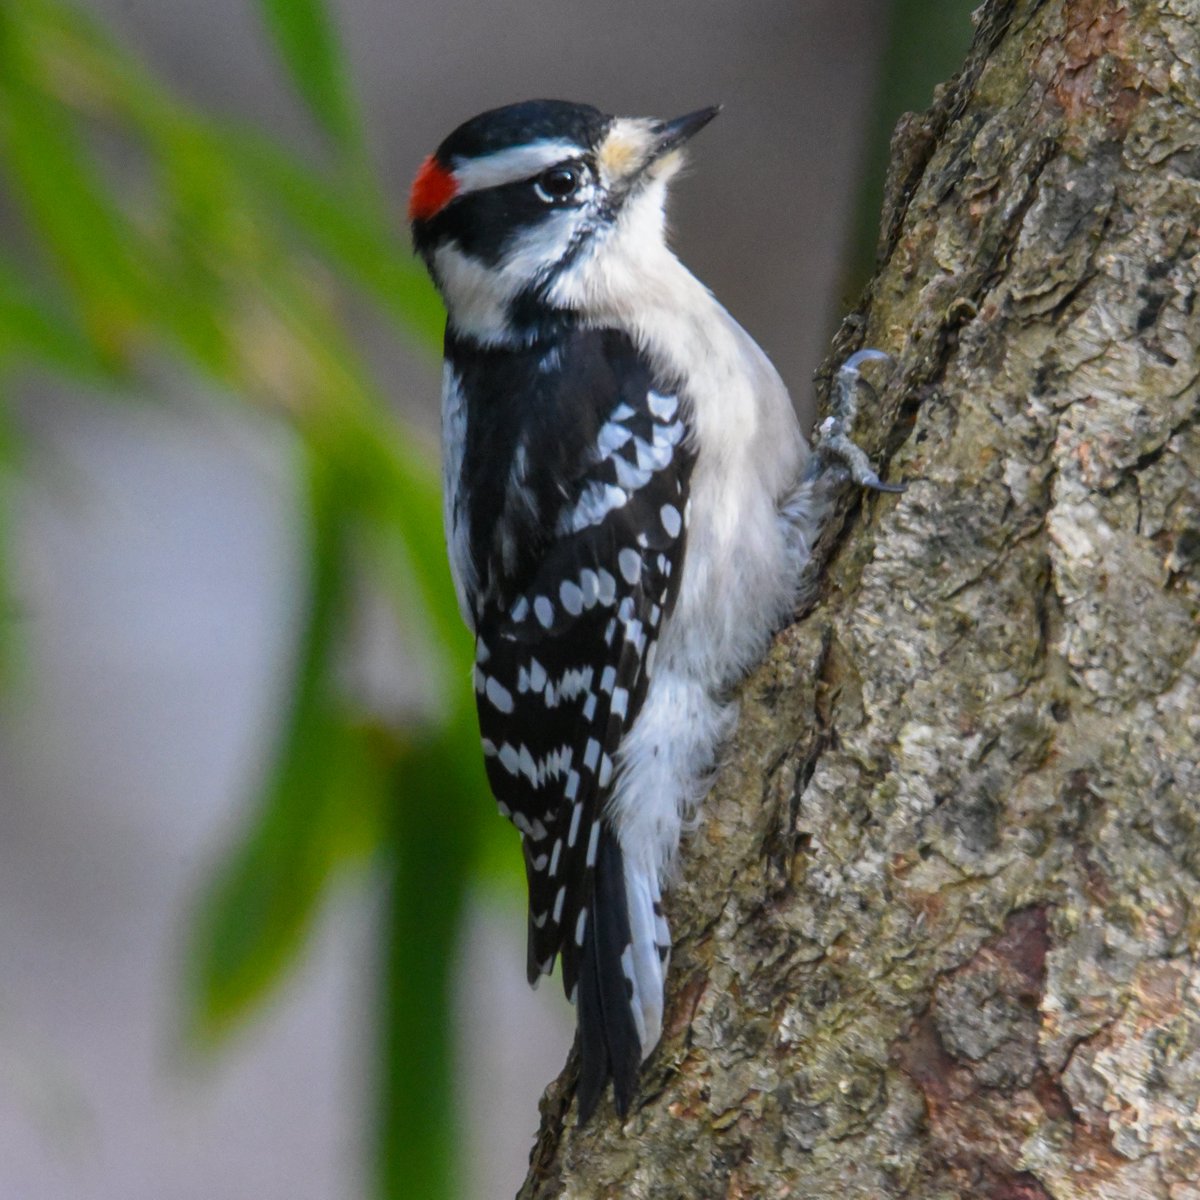 Downy Woodpecker shows up to sport some cool plumage and woodworking skills.

#downywoodpecker
#downywoodpeckers
#your_best_birds #marvelouz_animals_
#joyful_pics
#total_birds
#kings_birds
#made_nature_pics
#moon_best_animals
#world_bestanimal
#onfire_animals
#onfire_wildnature